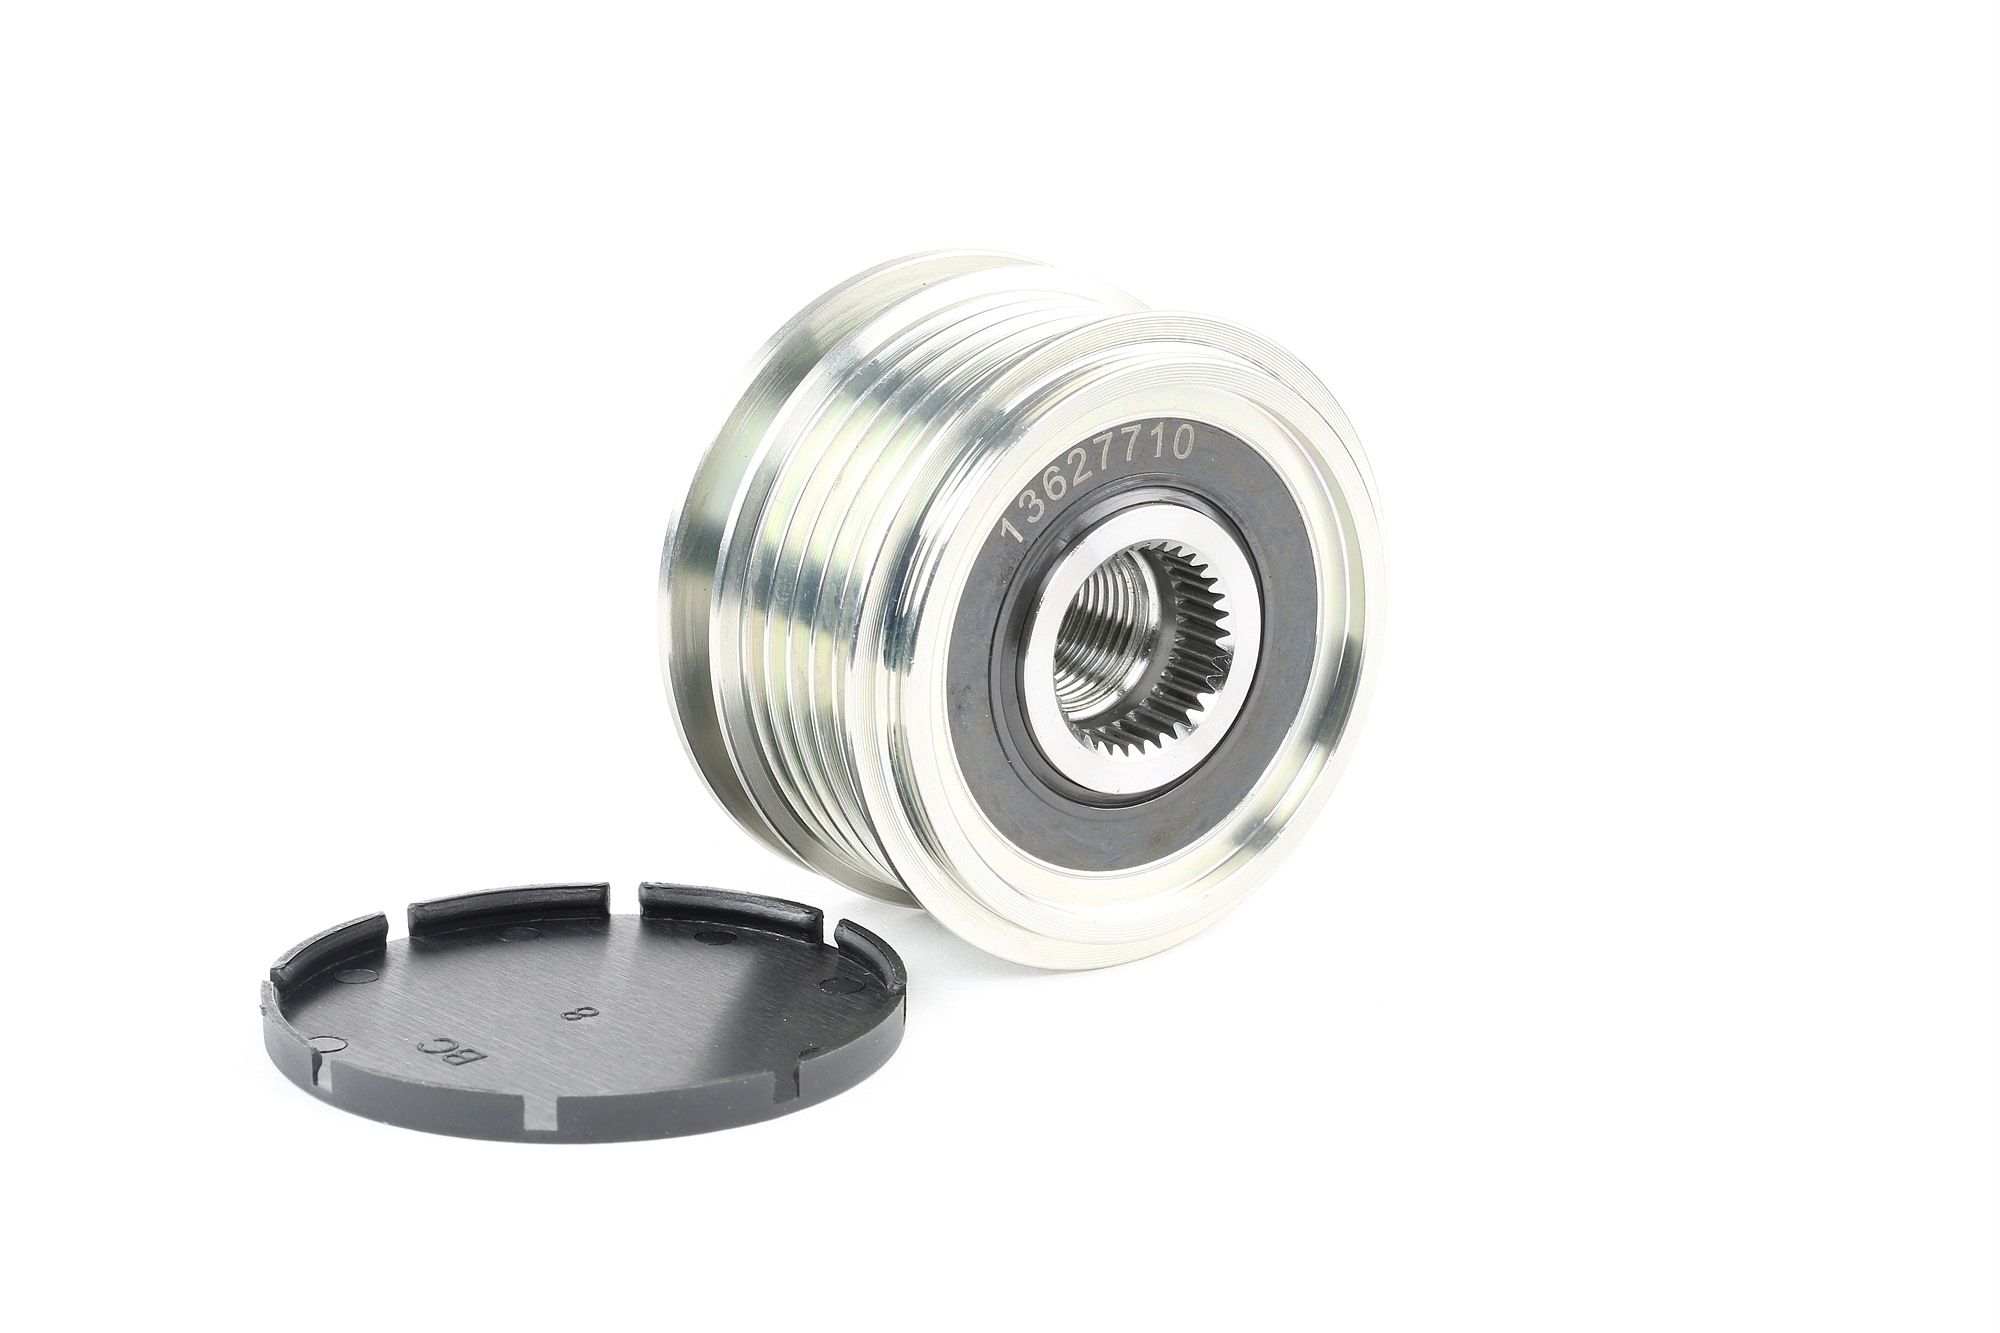 STARK SKFC-1210030 Alternator Freewheel Clutch Width: 40,6mm, Requires special tools for mounting